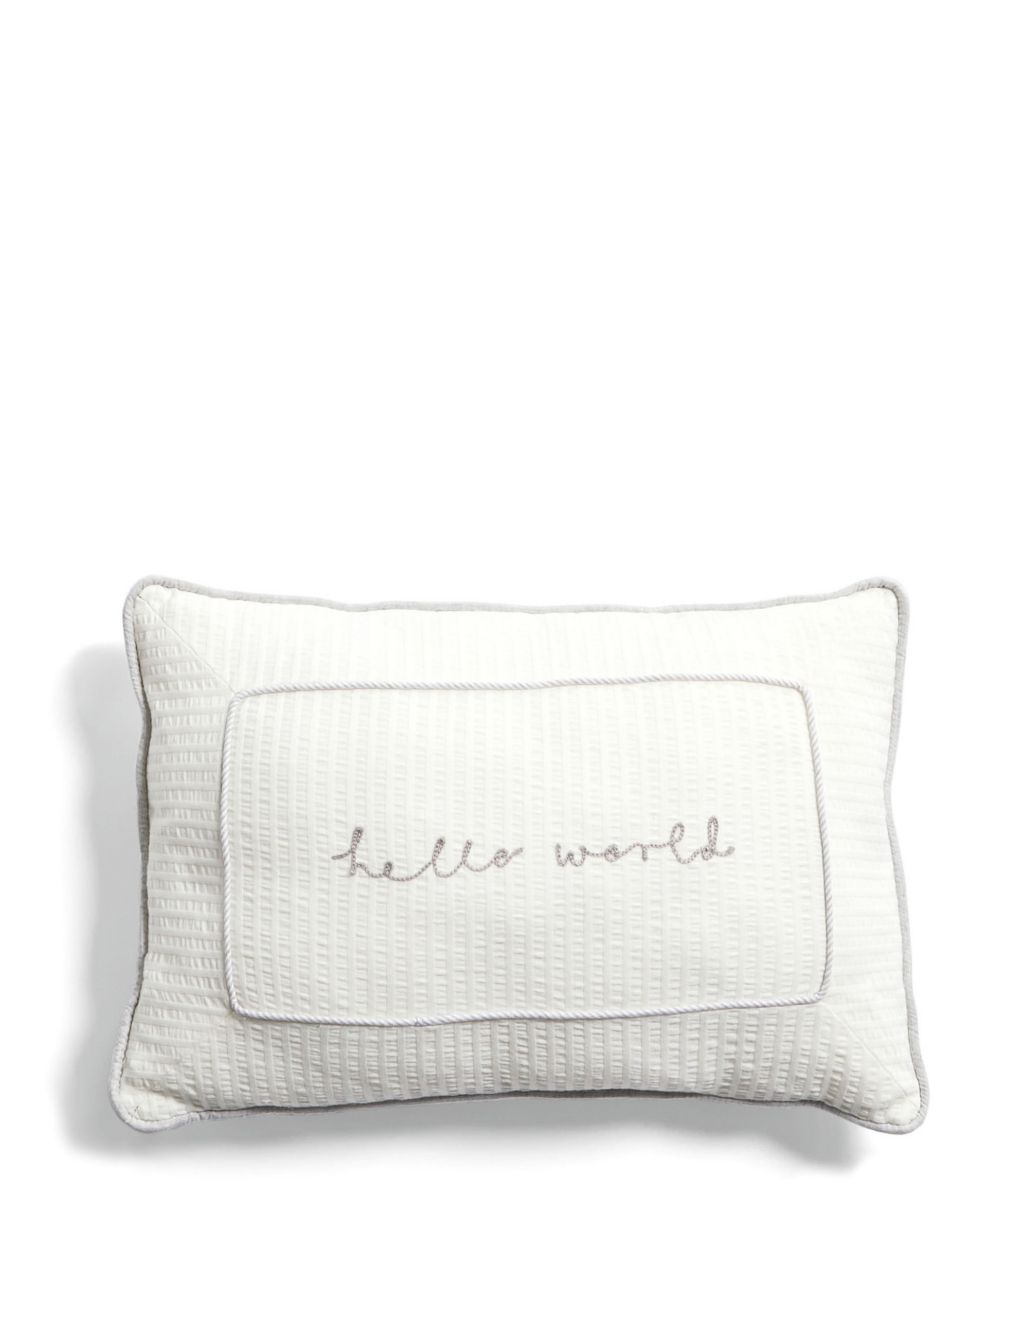 Welcome To The World Cushion - Slogan